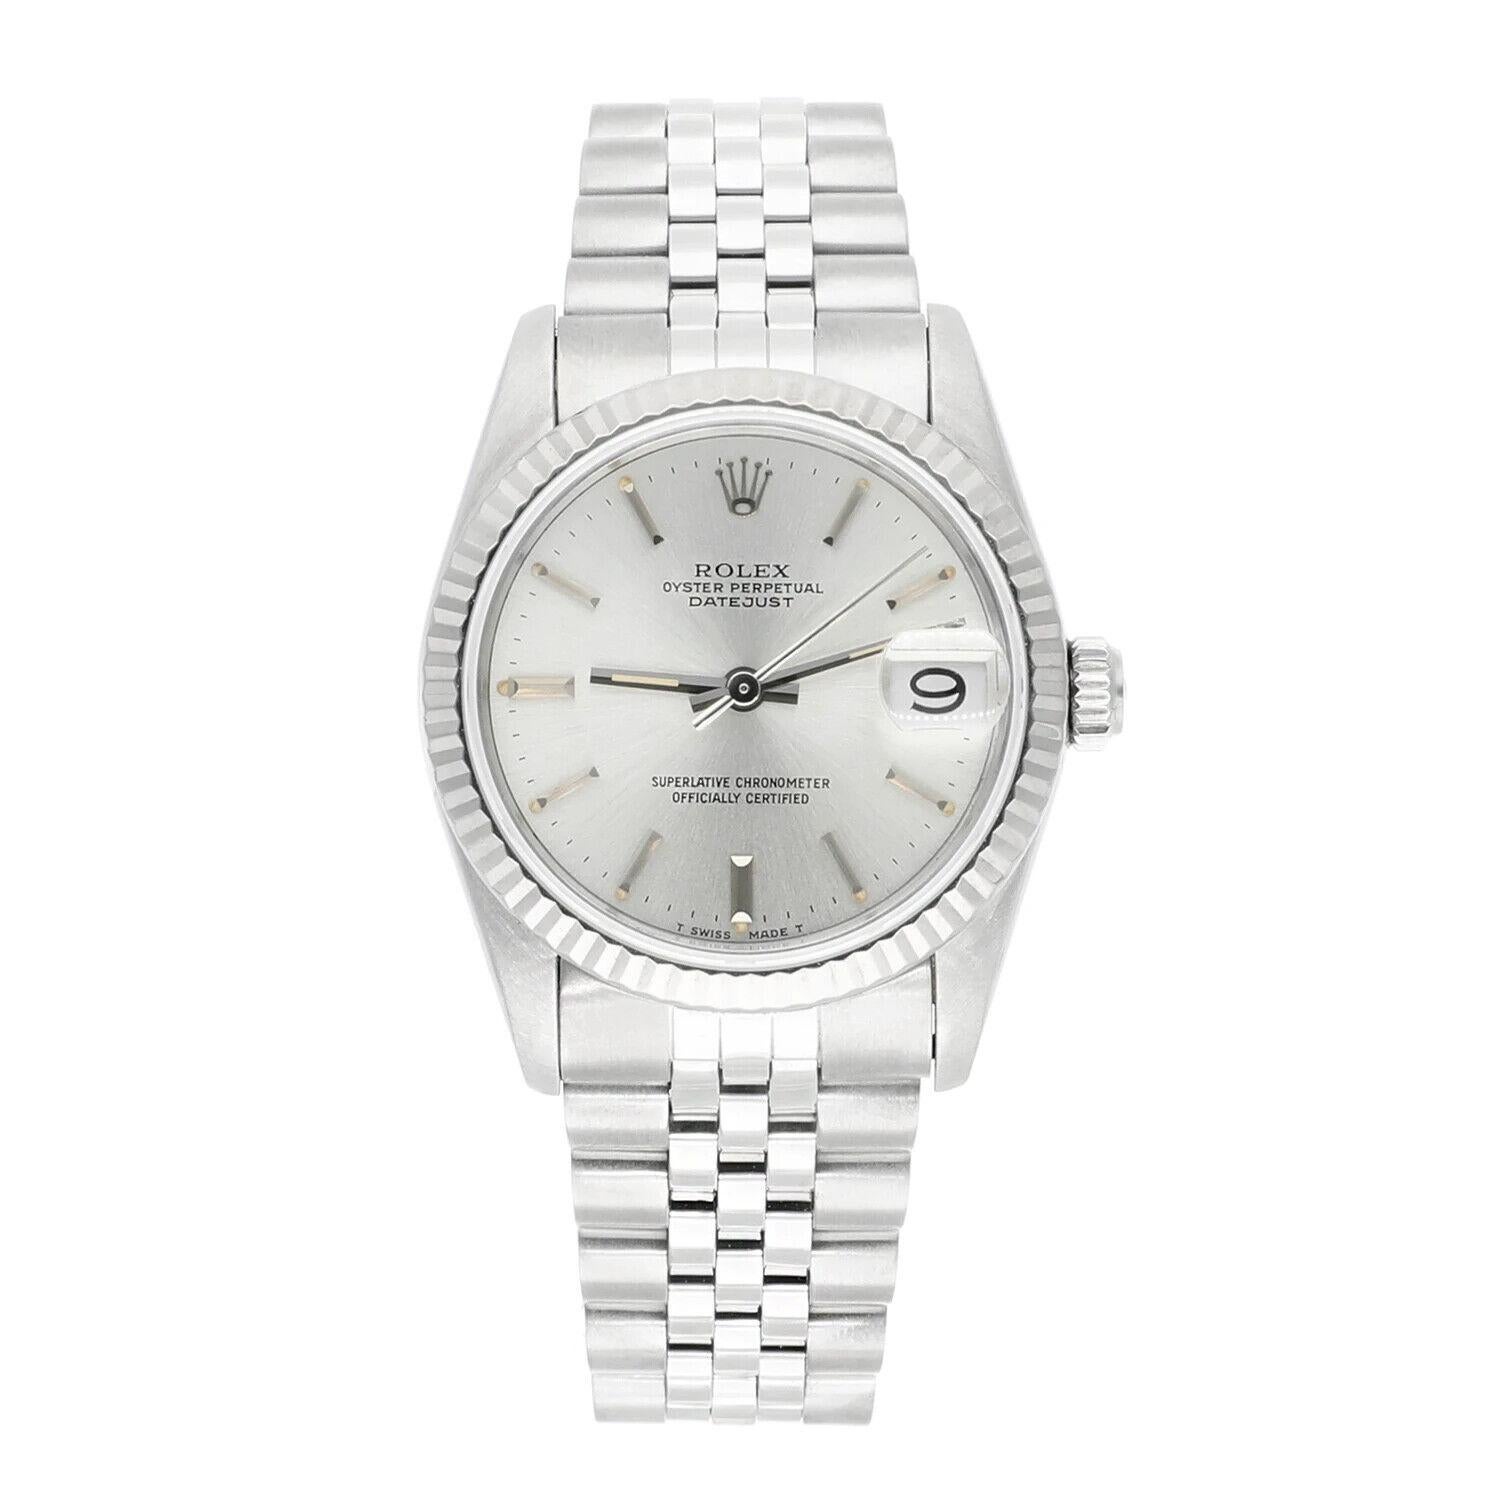 Rolex Datejust 31mm Silver Stick Dial Stainless Steel Watch White Gold Bezel, Circa 1984.
This watch has been professionally polished, serviced and is in excellent overall condition. There are absolutely no visible scratches or blemishes.